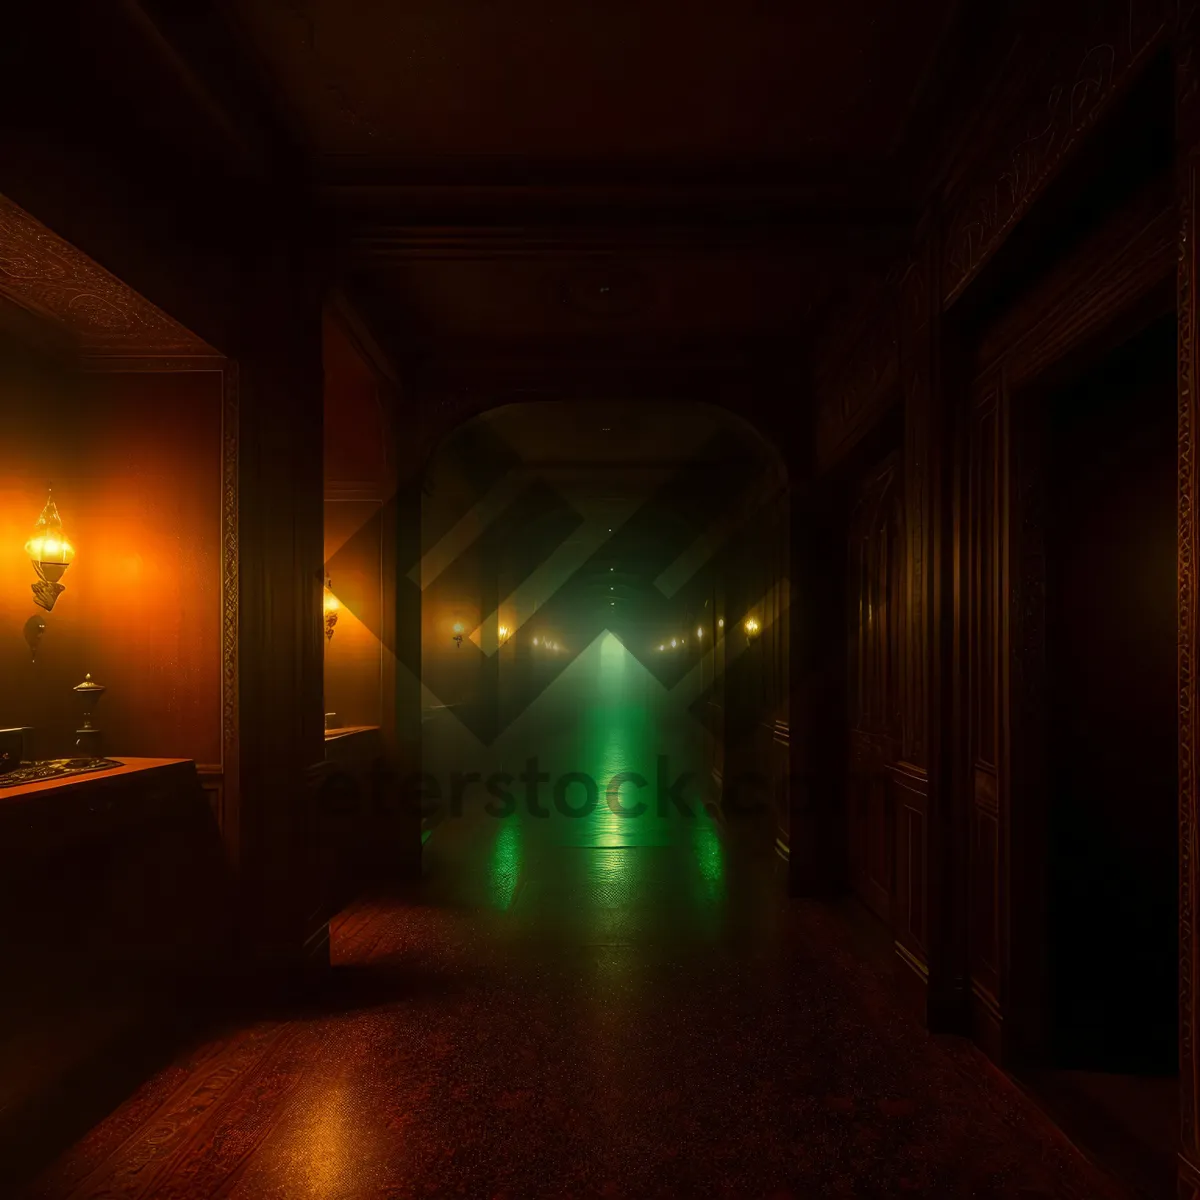 Picture of Ancient Corridor: A Majestic Old Hallway with Atmospheric Light